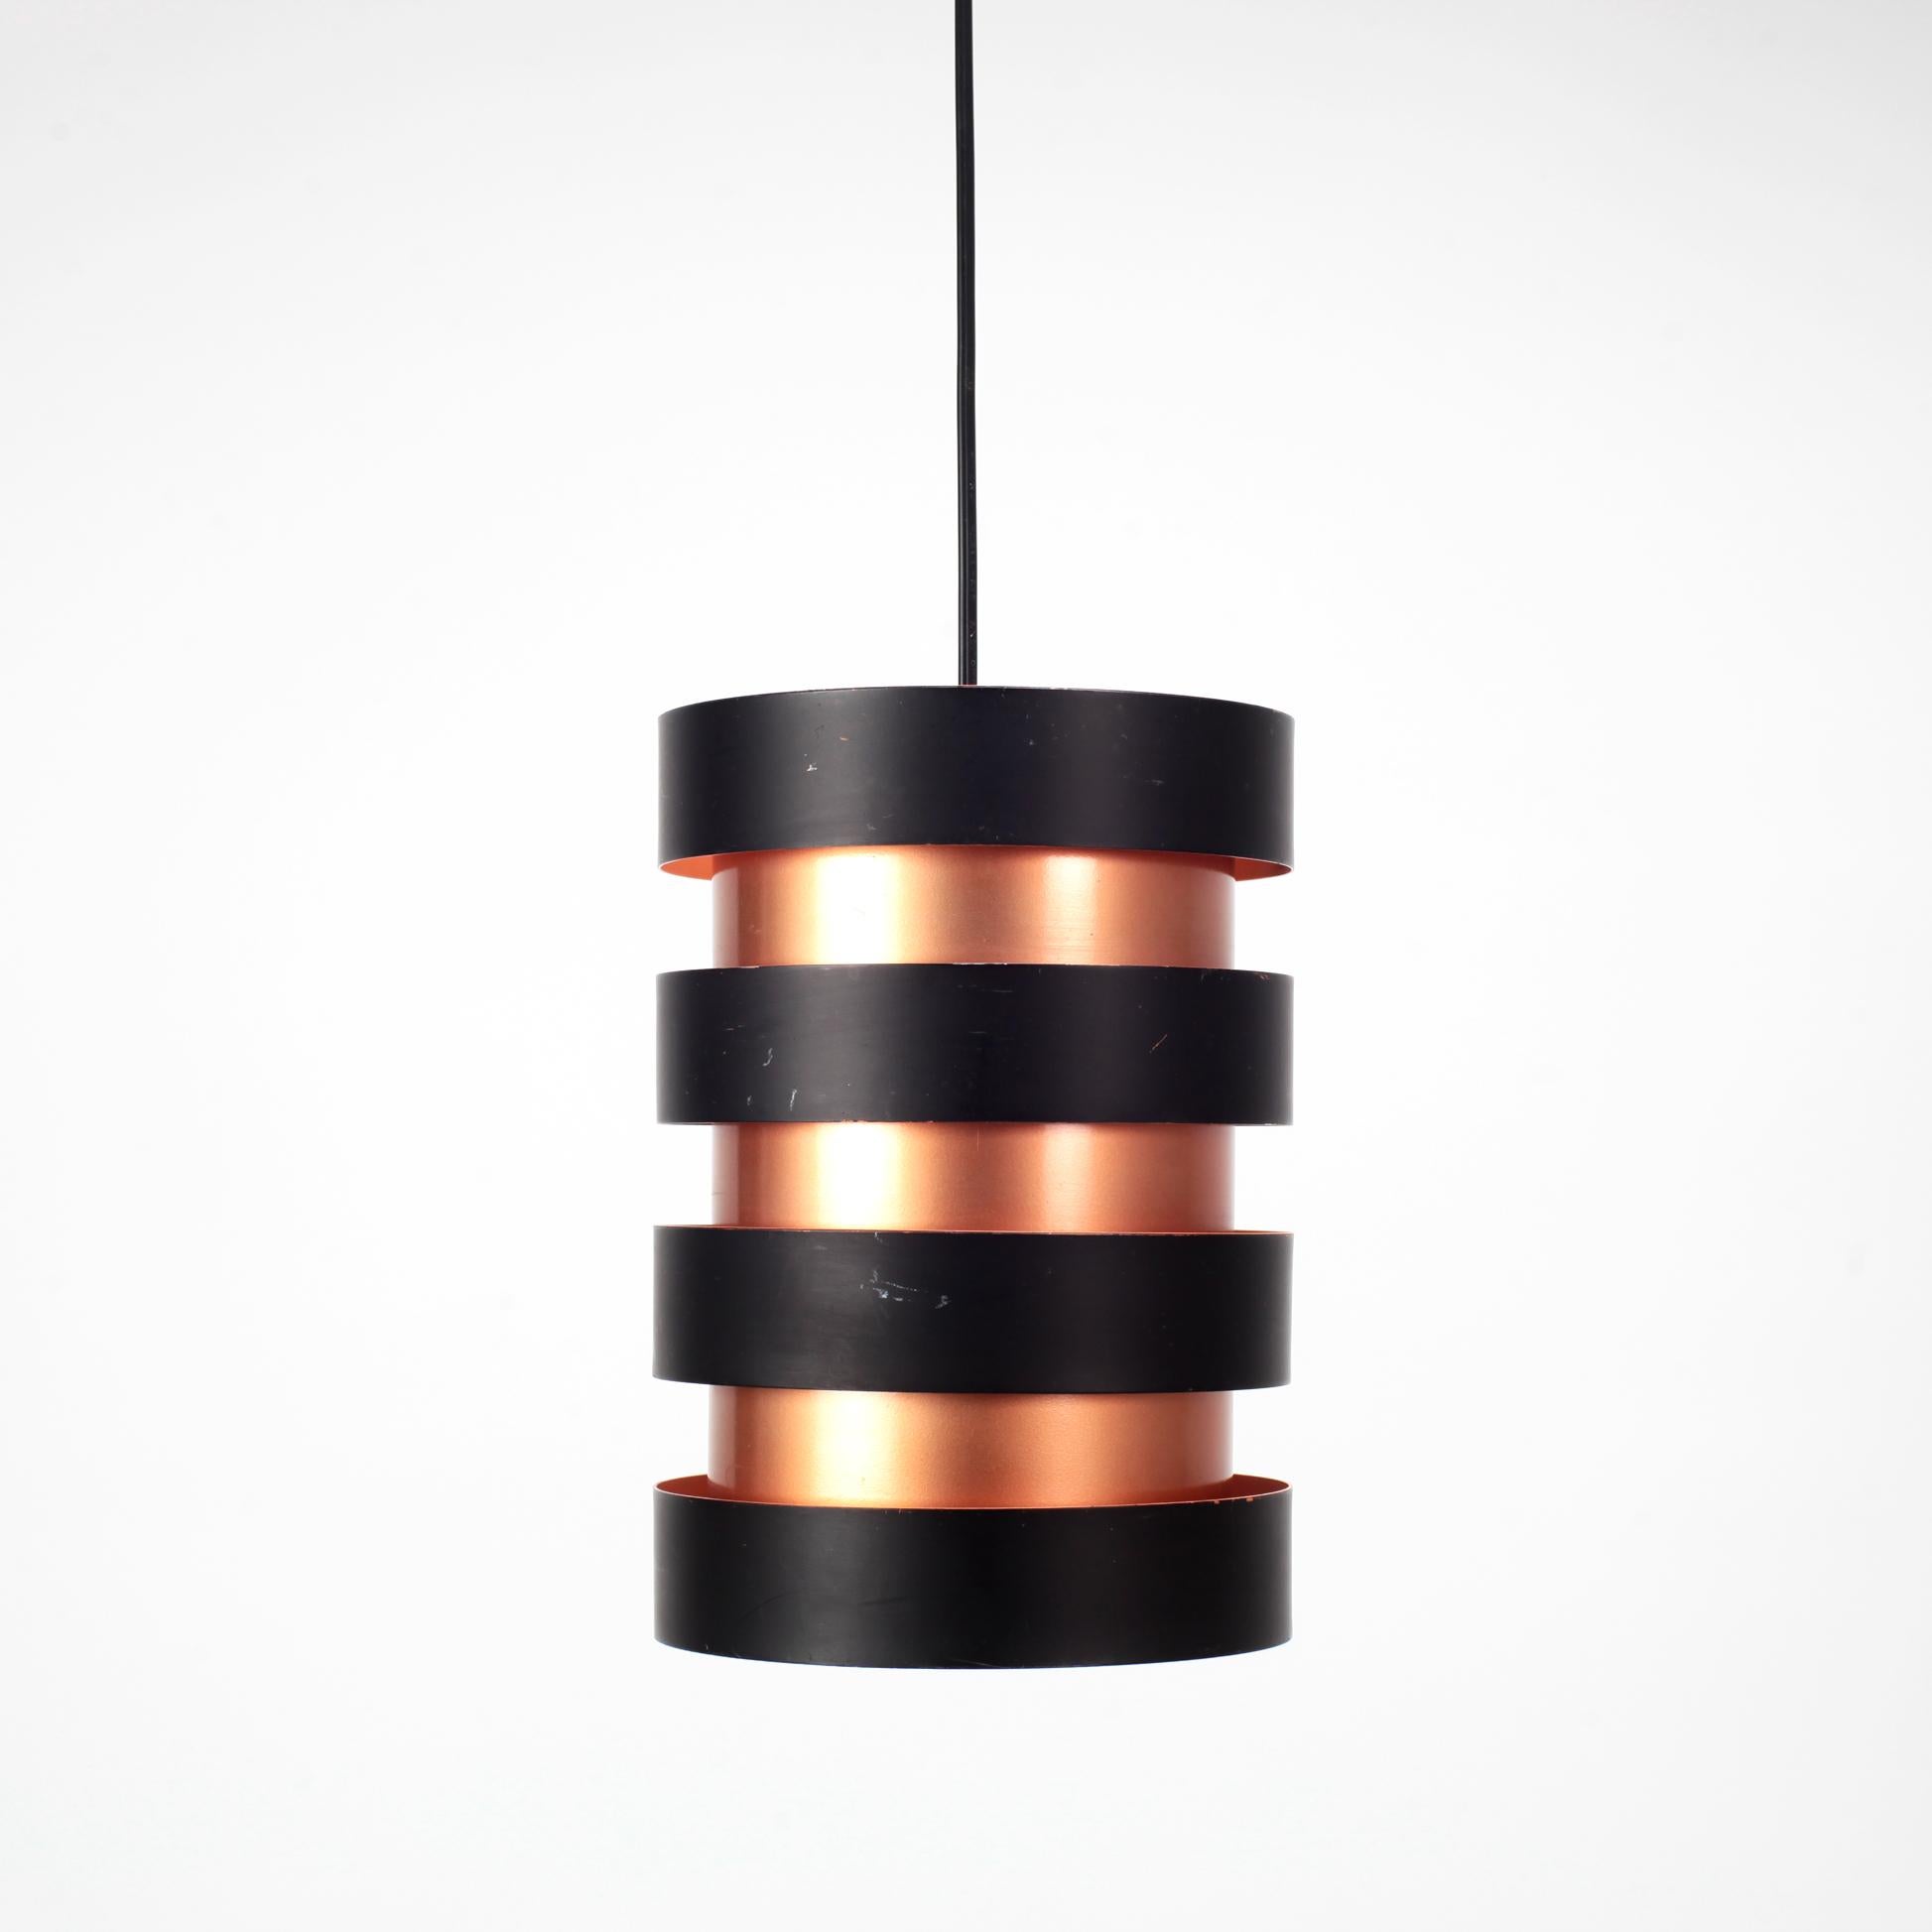 The iconic 'Eiffel' ceiling lamp designed by Jo Hammerborg for Fog & Morup. From Denmark in the 60s.

Beautiful design with the copper inner cylinder with 4 black outer rings. Orange interior screens, which provide very warm lighting.

1 E27